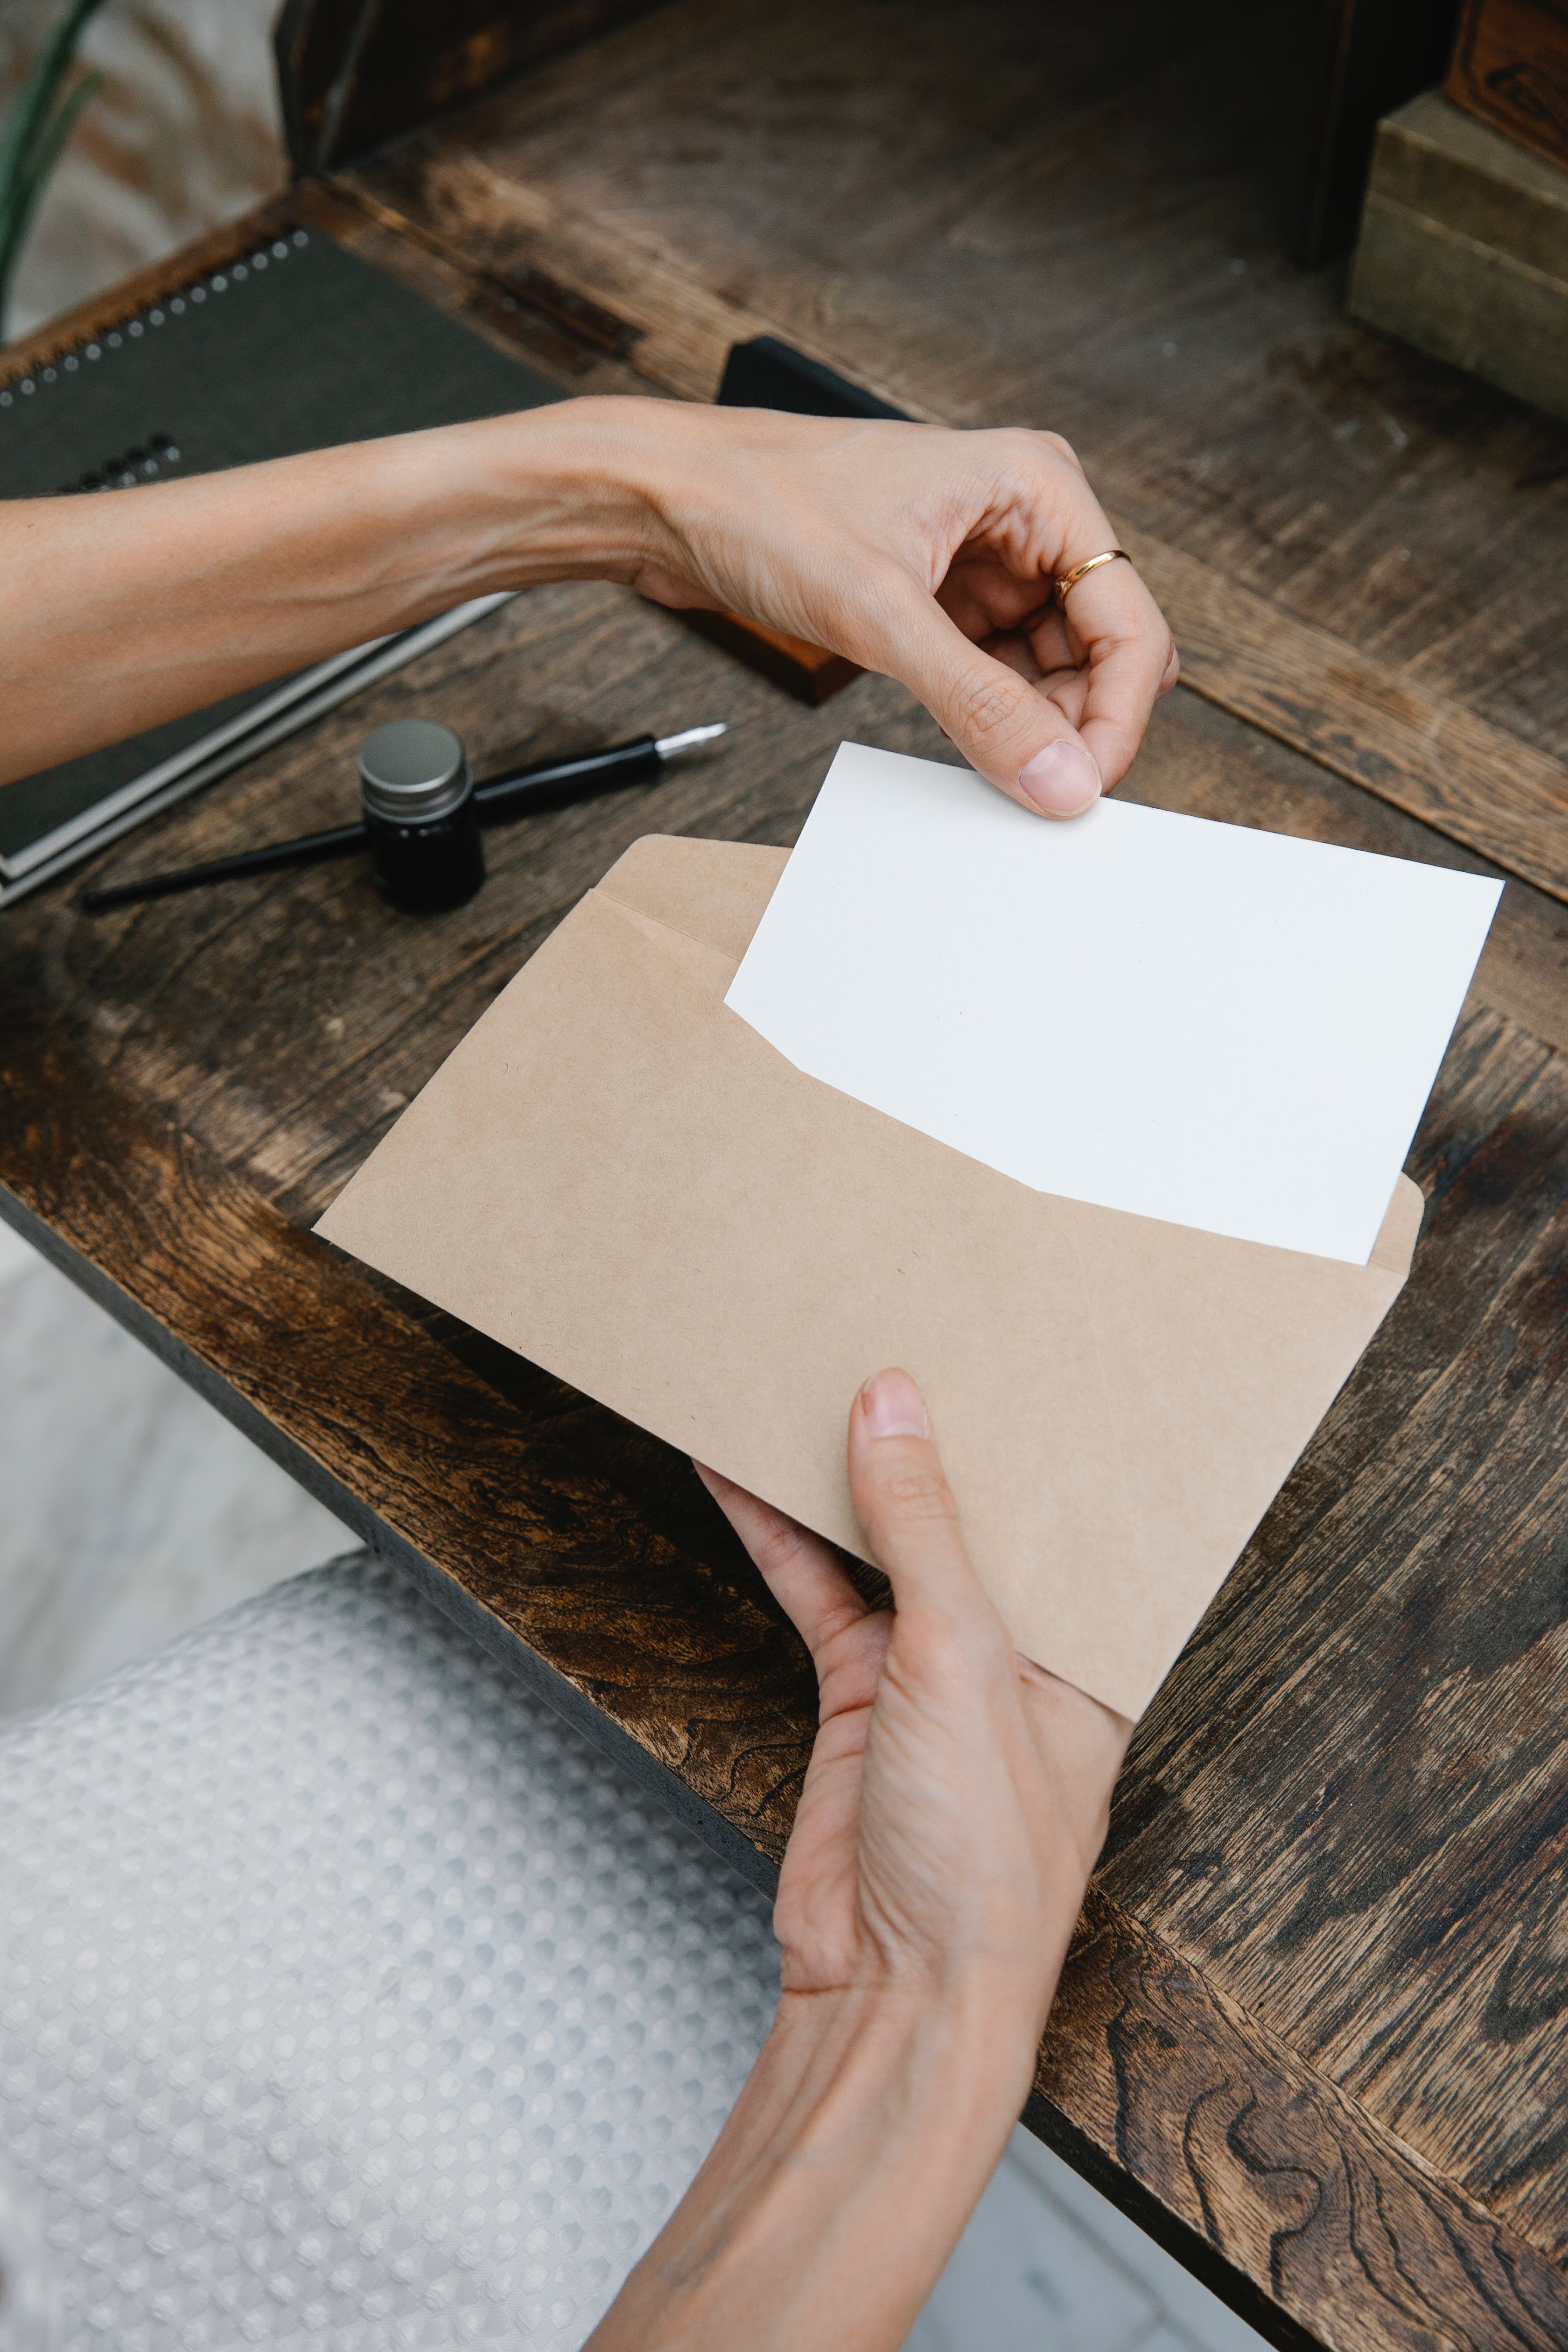 A woman placing a blank paper in an envelope | Source: Pexels